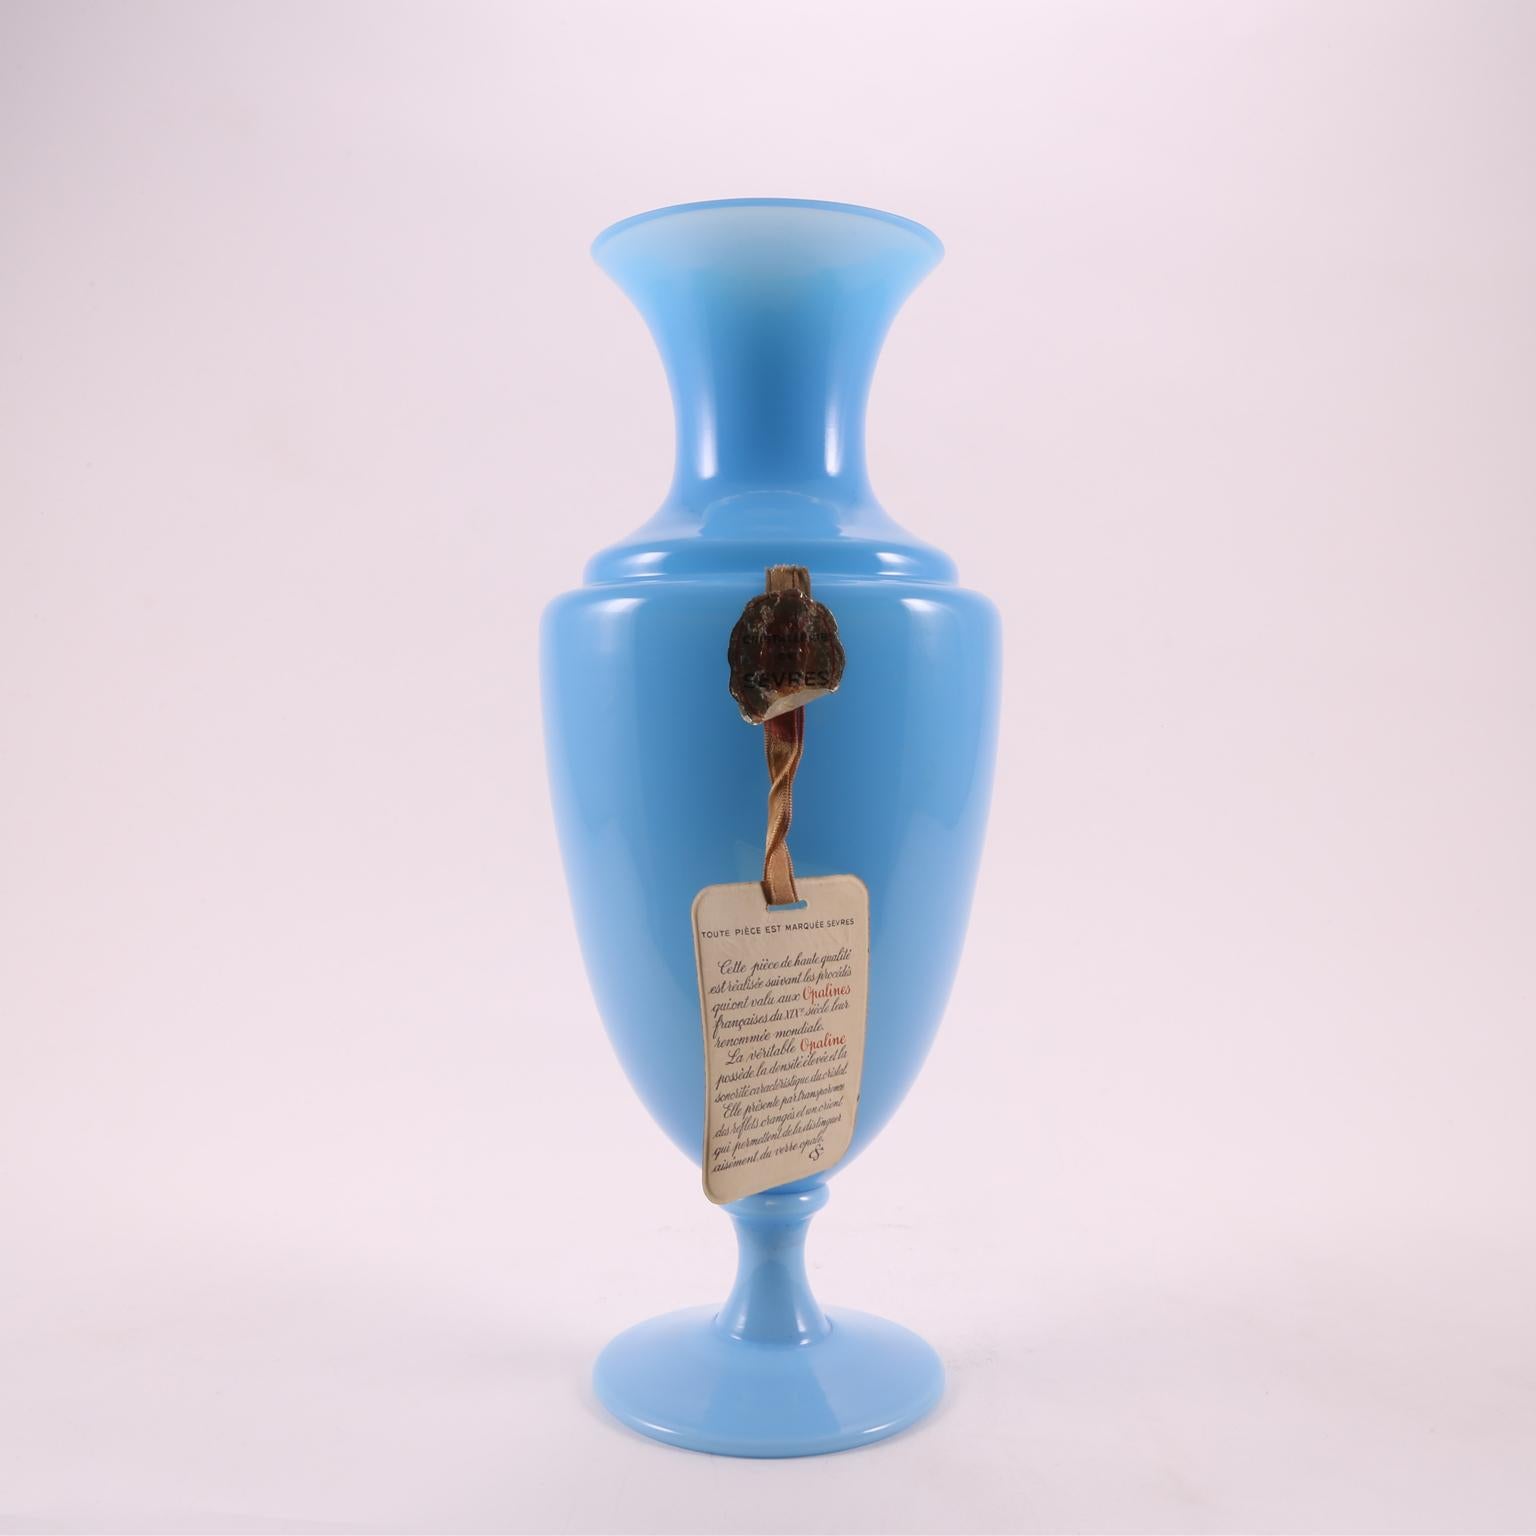 An original Sèvres vase from 1920, hand blown in France. 
In an elegant shade of light turquoise, with its original ribbon and label, that are in perfect shape, and on the backward of the card you will find a description of the vase in French,